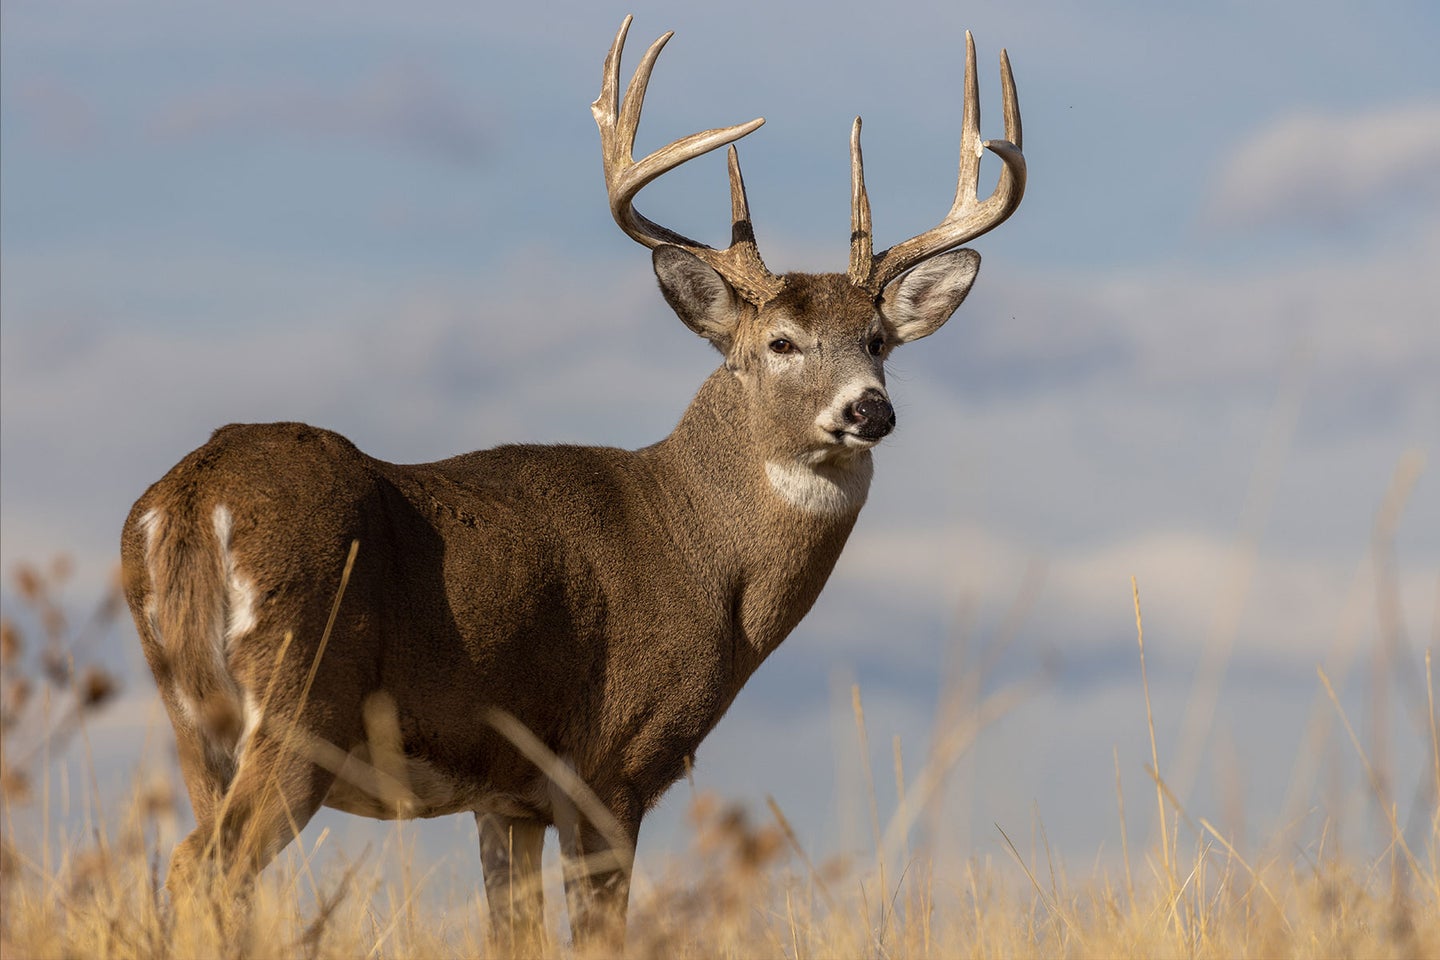 A whitetail buck stands in a field.